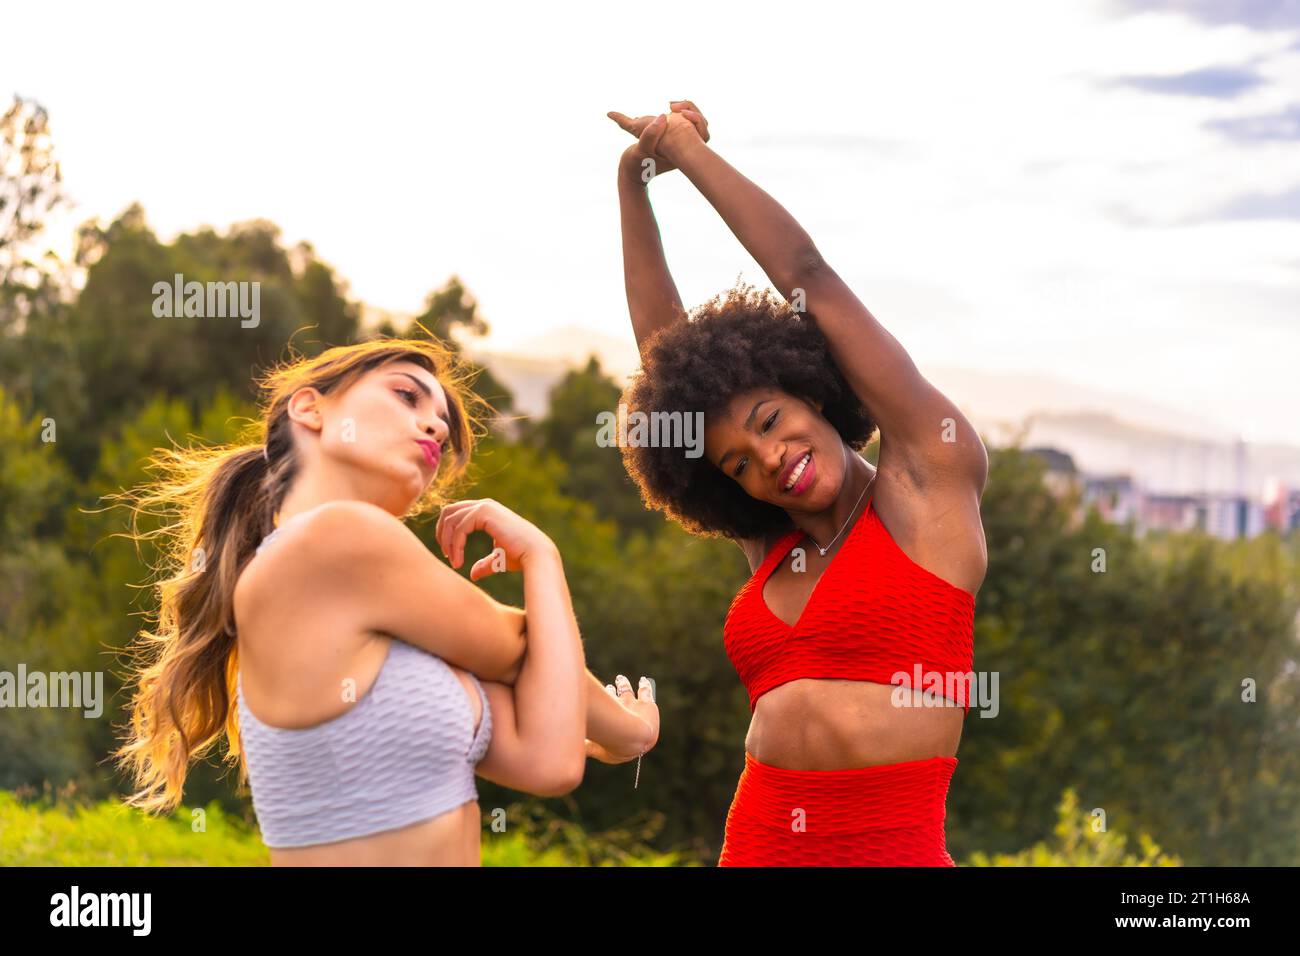 Caucasian blonde girl and dark-skinned girl with afro hair doing stretching before starting sports in the park. Healthy life, fitness, fitness girls Stock Photo